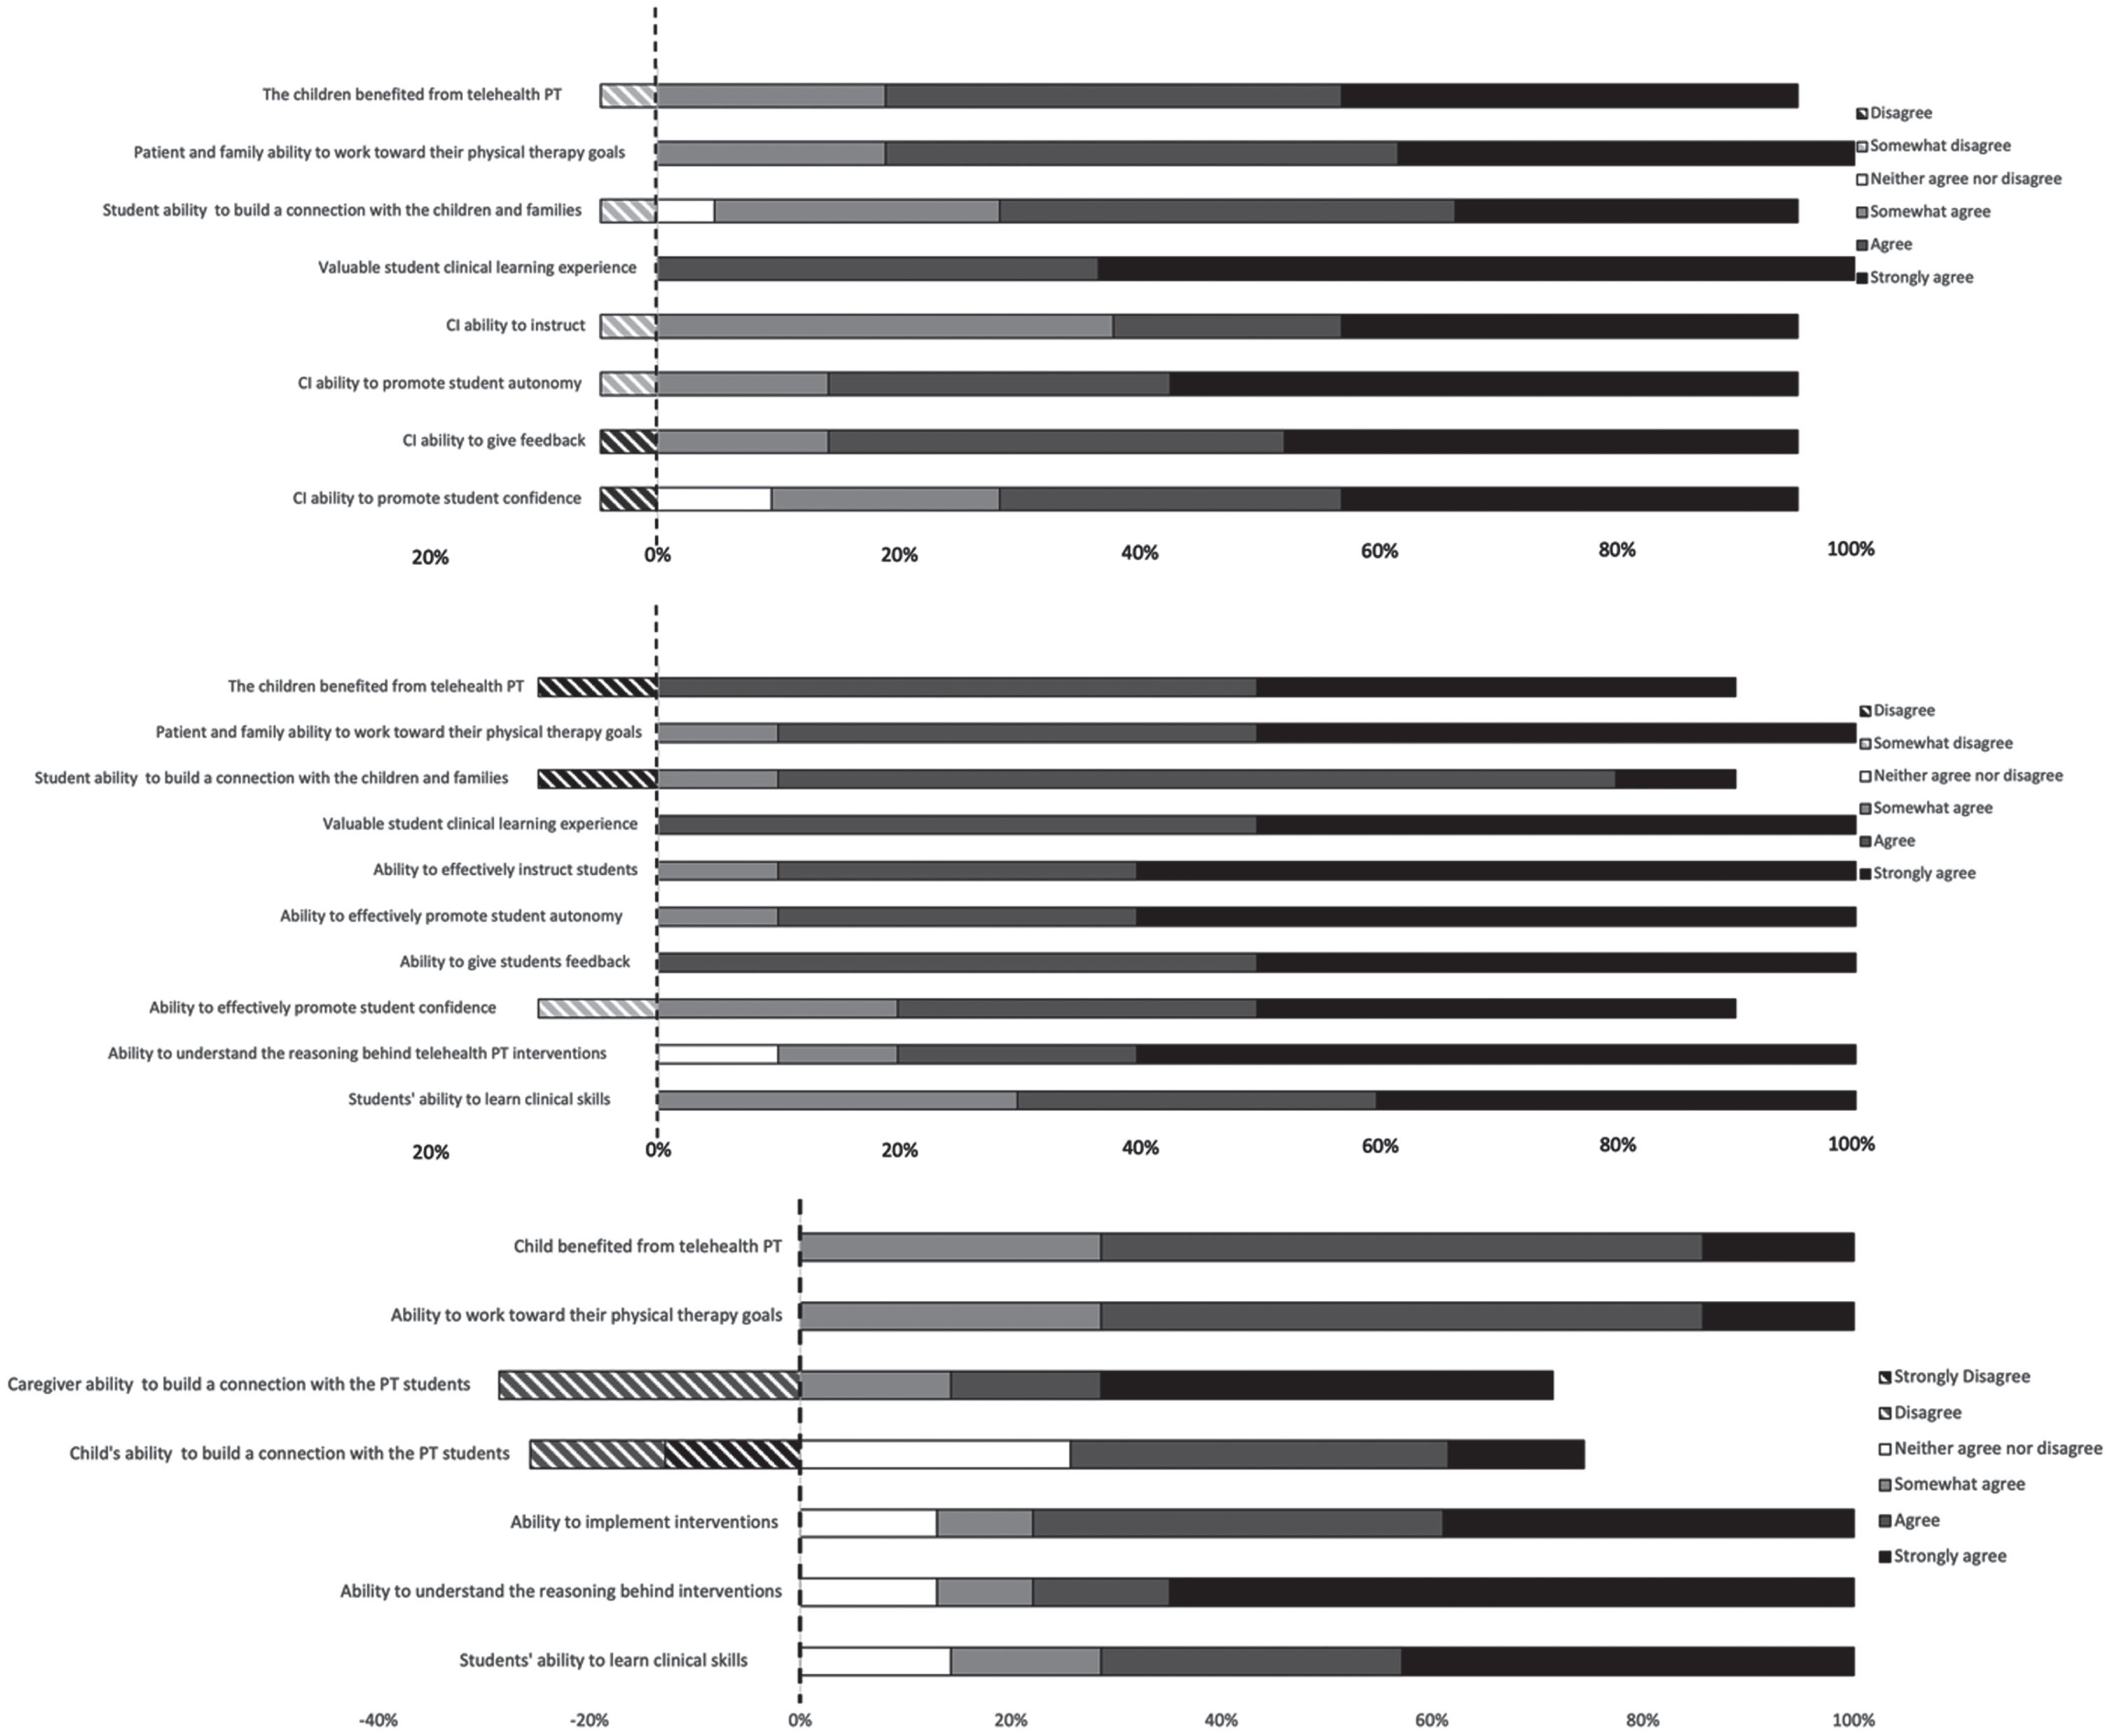 Perspectives of the students (A), CIs (B), and caregivers (C) on the telehealth PT and learning experience from questionnaires. The percentage of students (A), CIs (B), and caregivers (C) who agreed/ disagreed with statements regarding the ability to benefit from the experience in regards to physical therapy intervention and student learning.